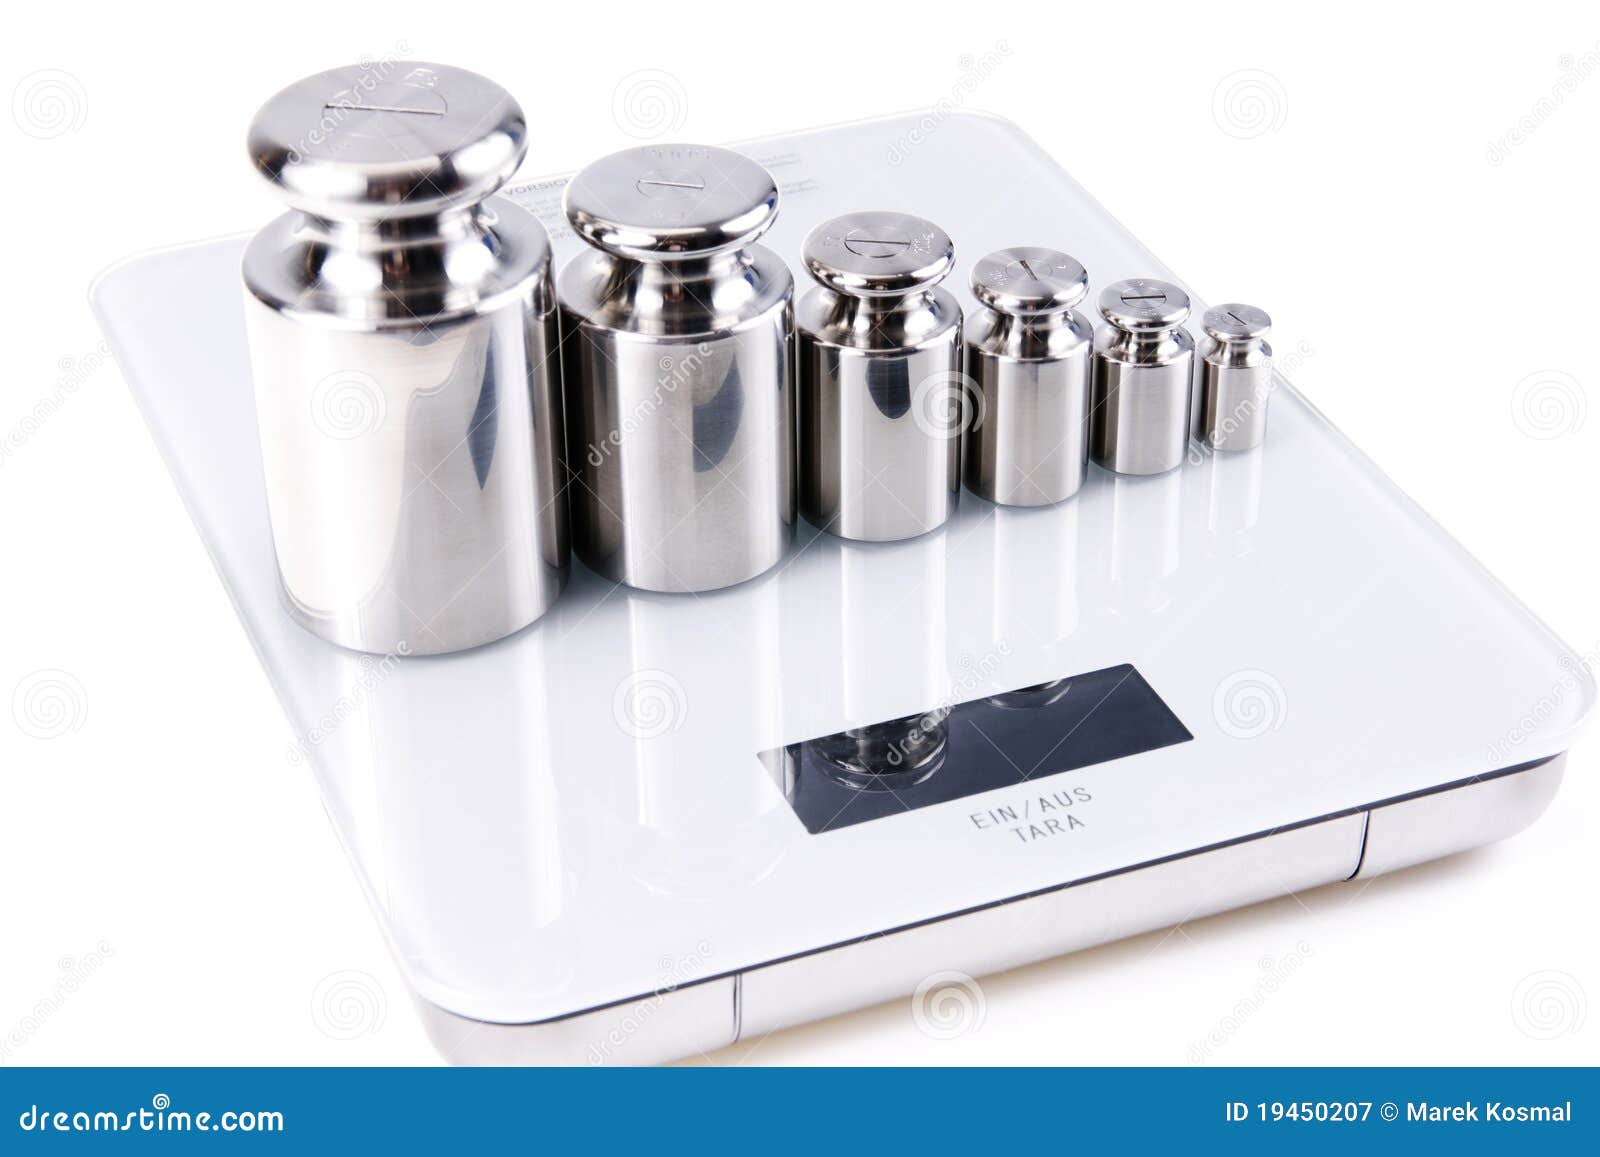 calibration weight silver